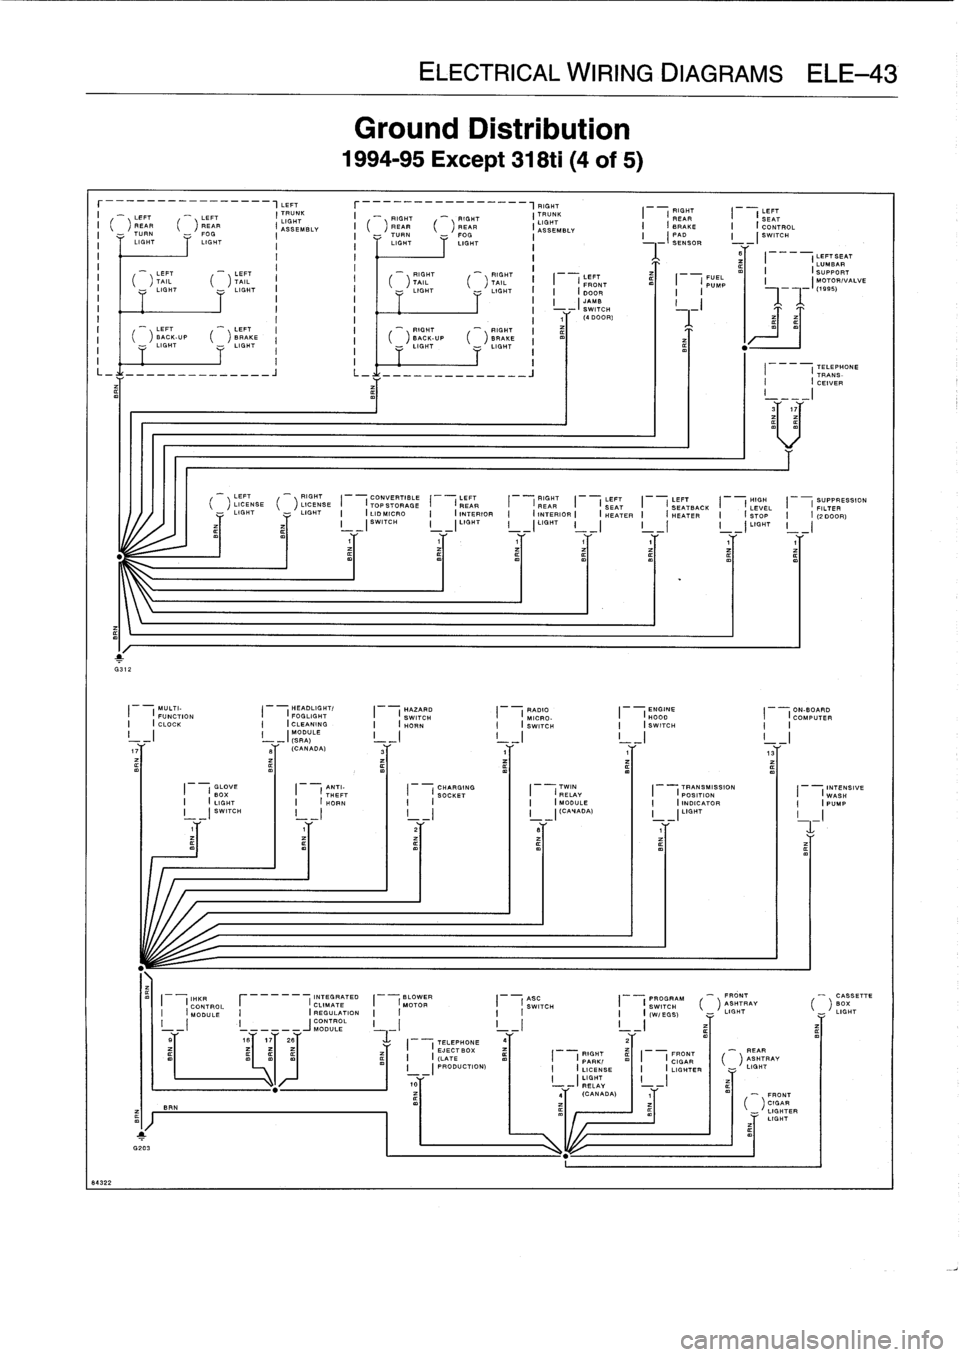 BMW 328i 1997 E36 Owners Guide 
ELECTRICAL
WIRING
DIAGRAMSELE-43

r----------_-__--,LEFT

	

r---__-------~_--,FIGHT
I

	

-

	

RIGHT

	

LIT
LEFT

	

"-

	

LEFT

	

I
IGHT
K

	

I

	

_

	

RIGHT

	



	

RIGHT

	

I
TRUNK
SEM